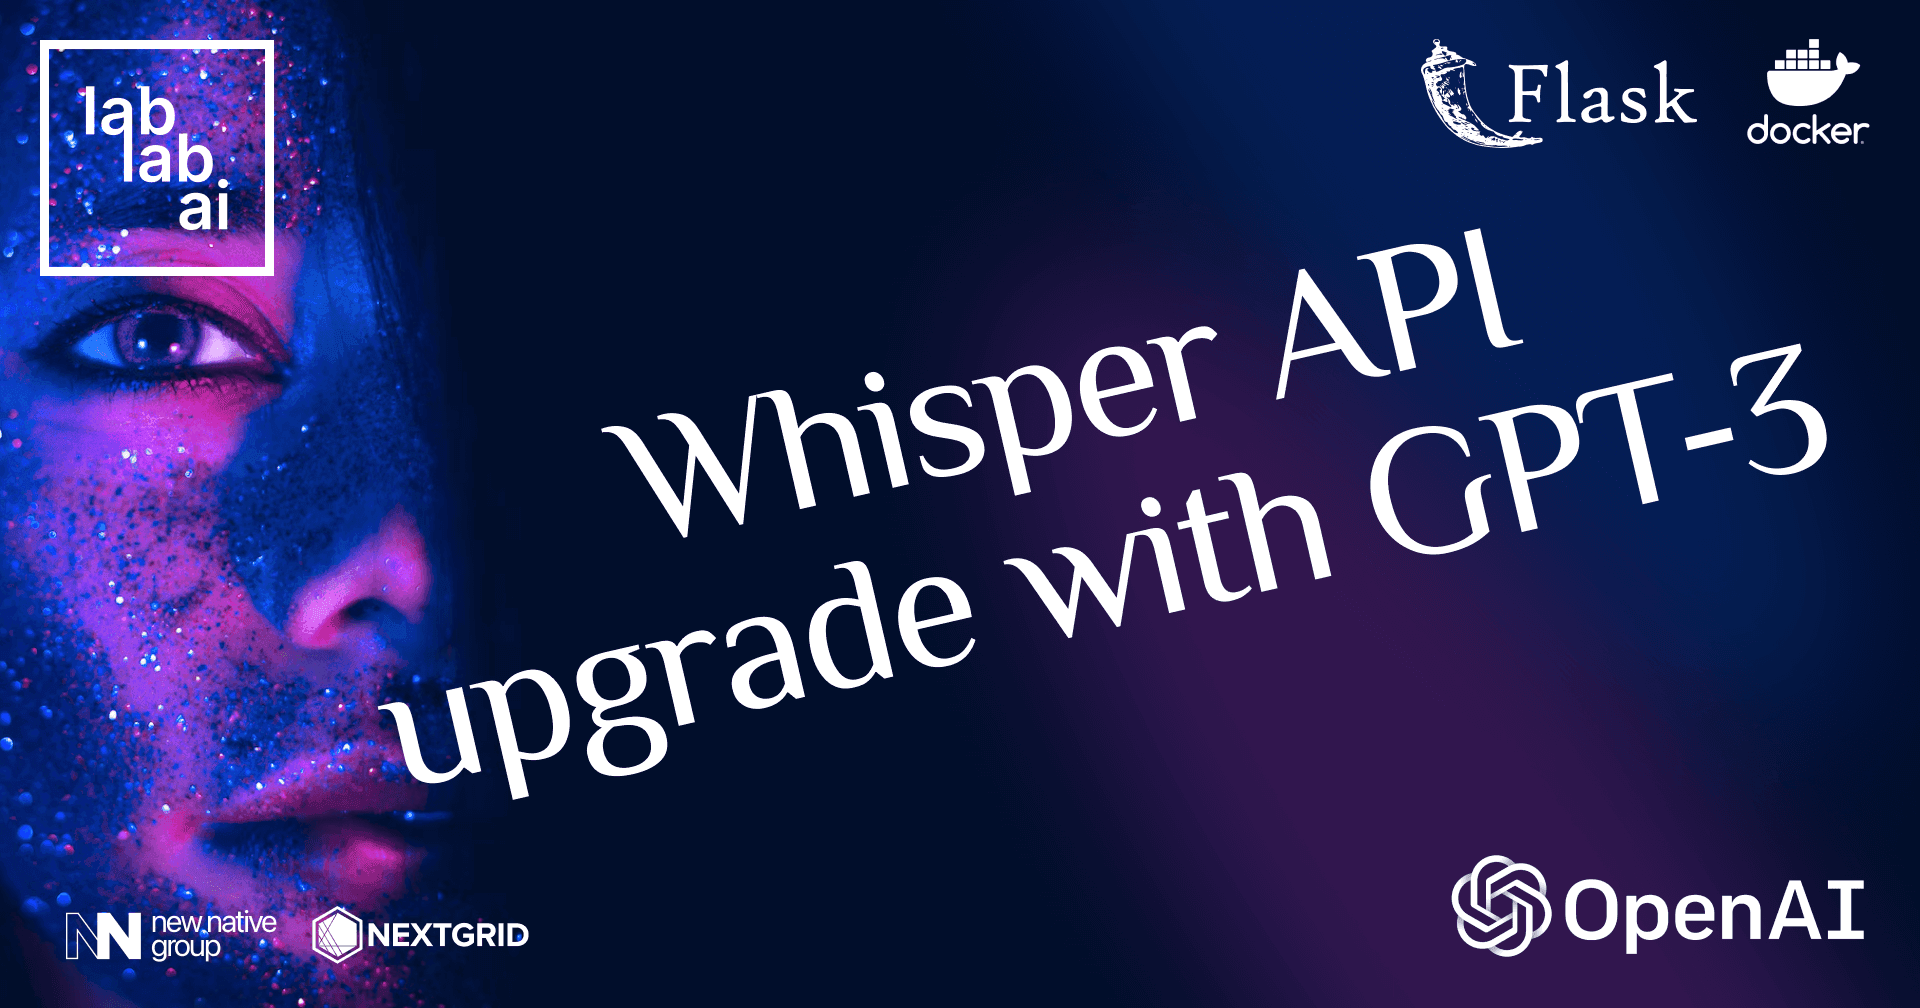 Updating our Whisper API with GPT-3 tutorial